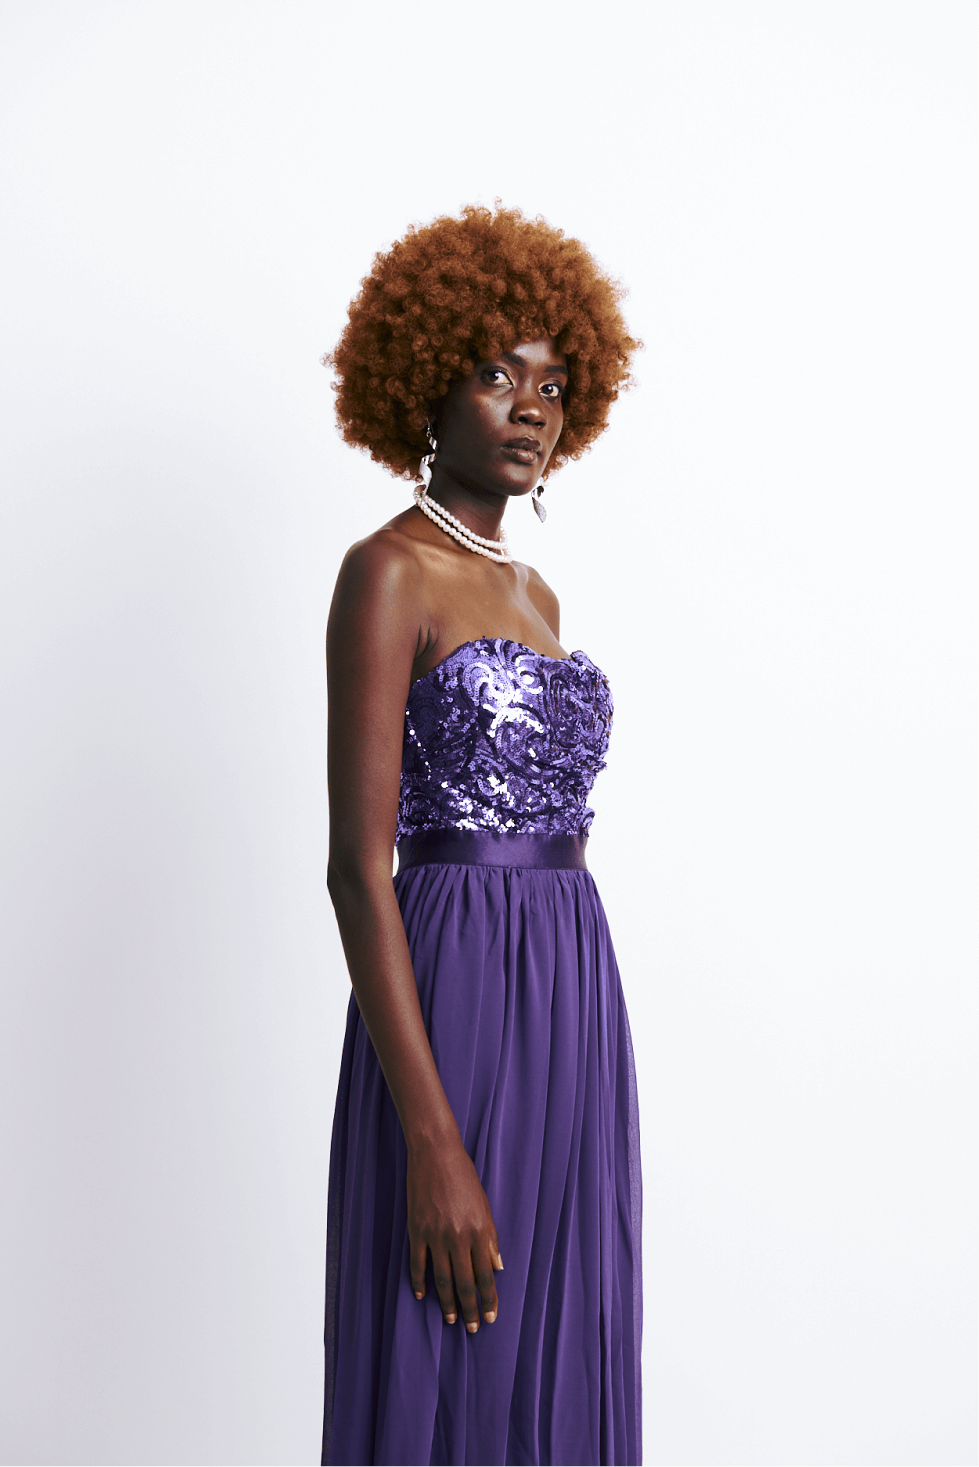 Shop Embellished Evening Dress by The Fashion Frenzy on Arrai. Discover stylish, affordable clothing, jewelry, handbags and unique handmade pieces from top Kenyan & African fashion brands prioritising sustainability and quality craftsmanship.